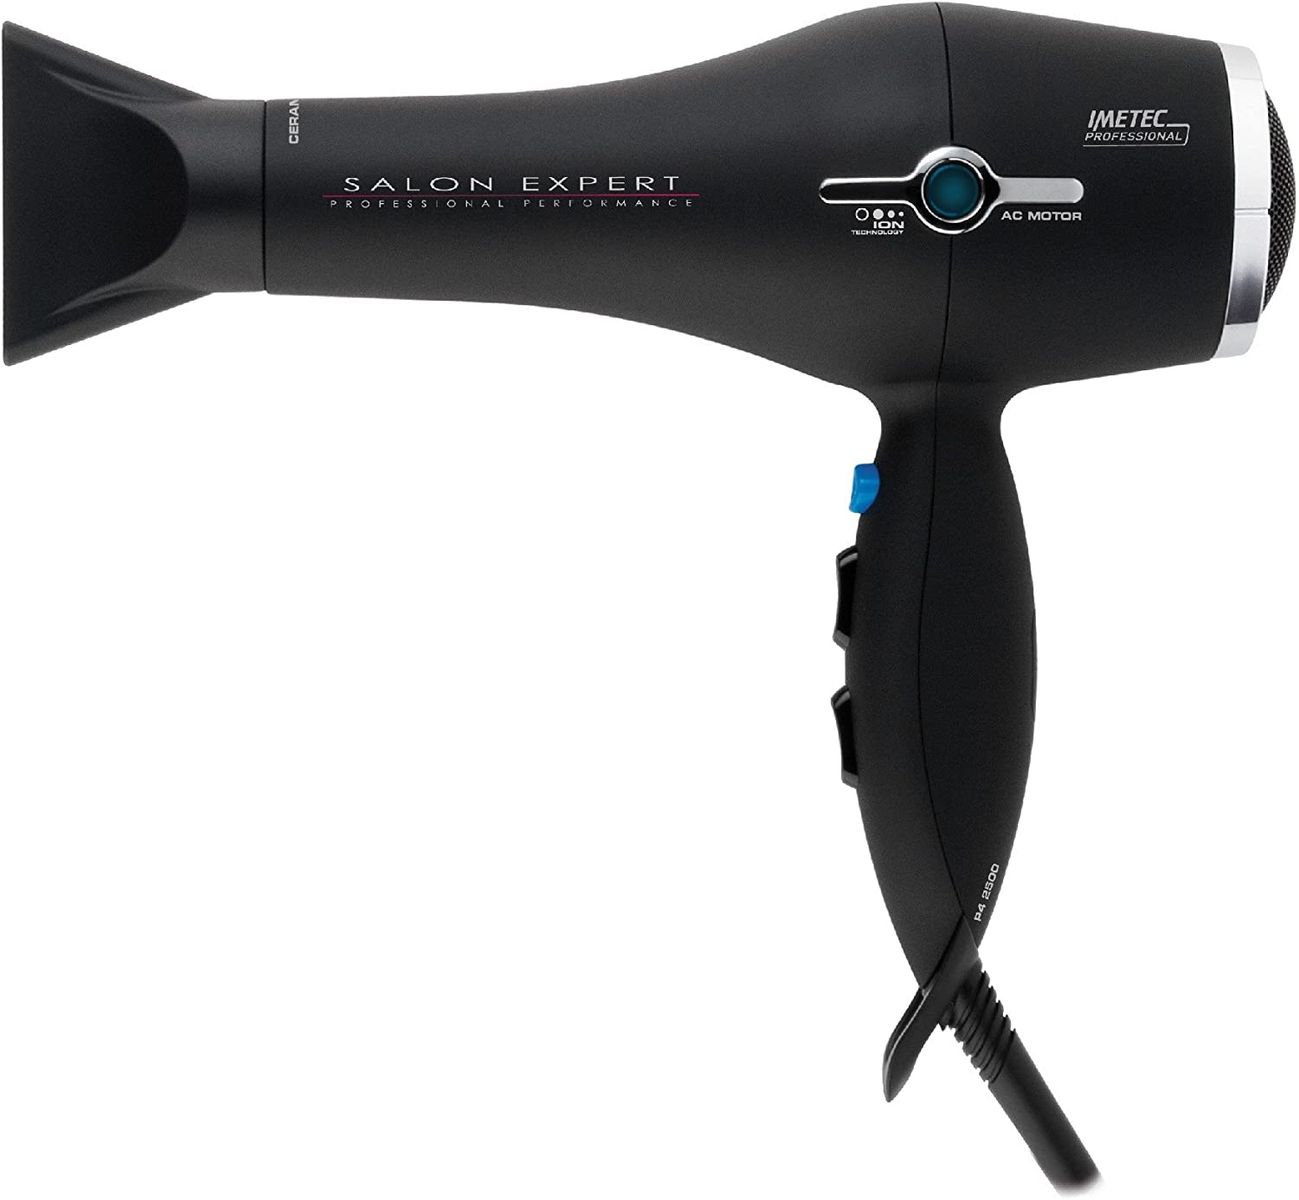 Imetec Salon Expert P4 2500 ION, Professional Hair Dryer, Ion Technology, Ceramic and Tourmaline Grid, 8 Blower and Temperature Settings